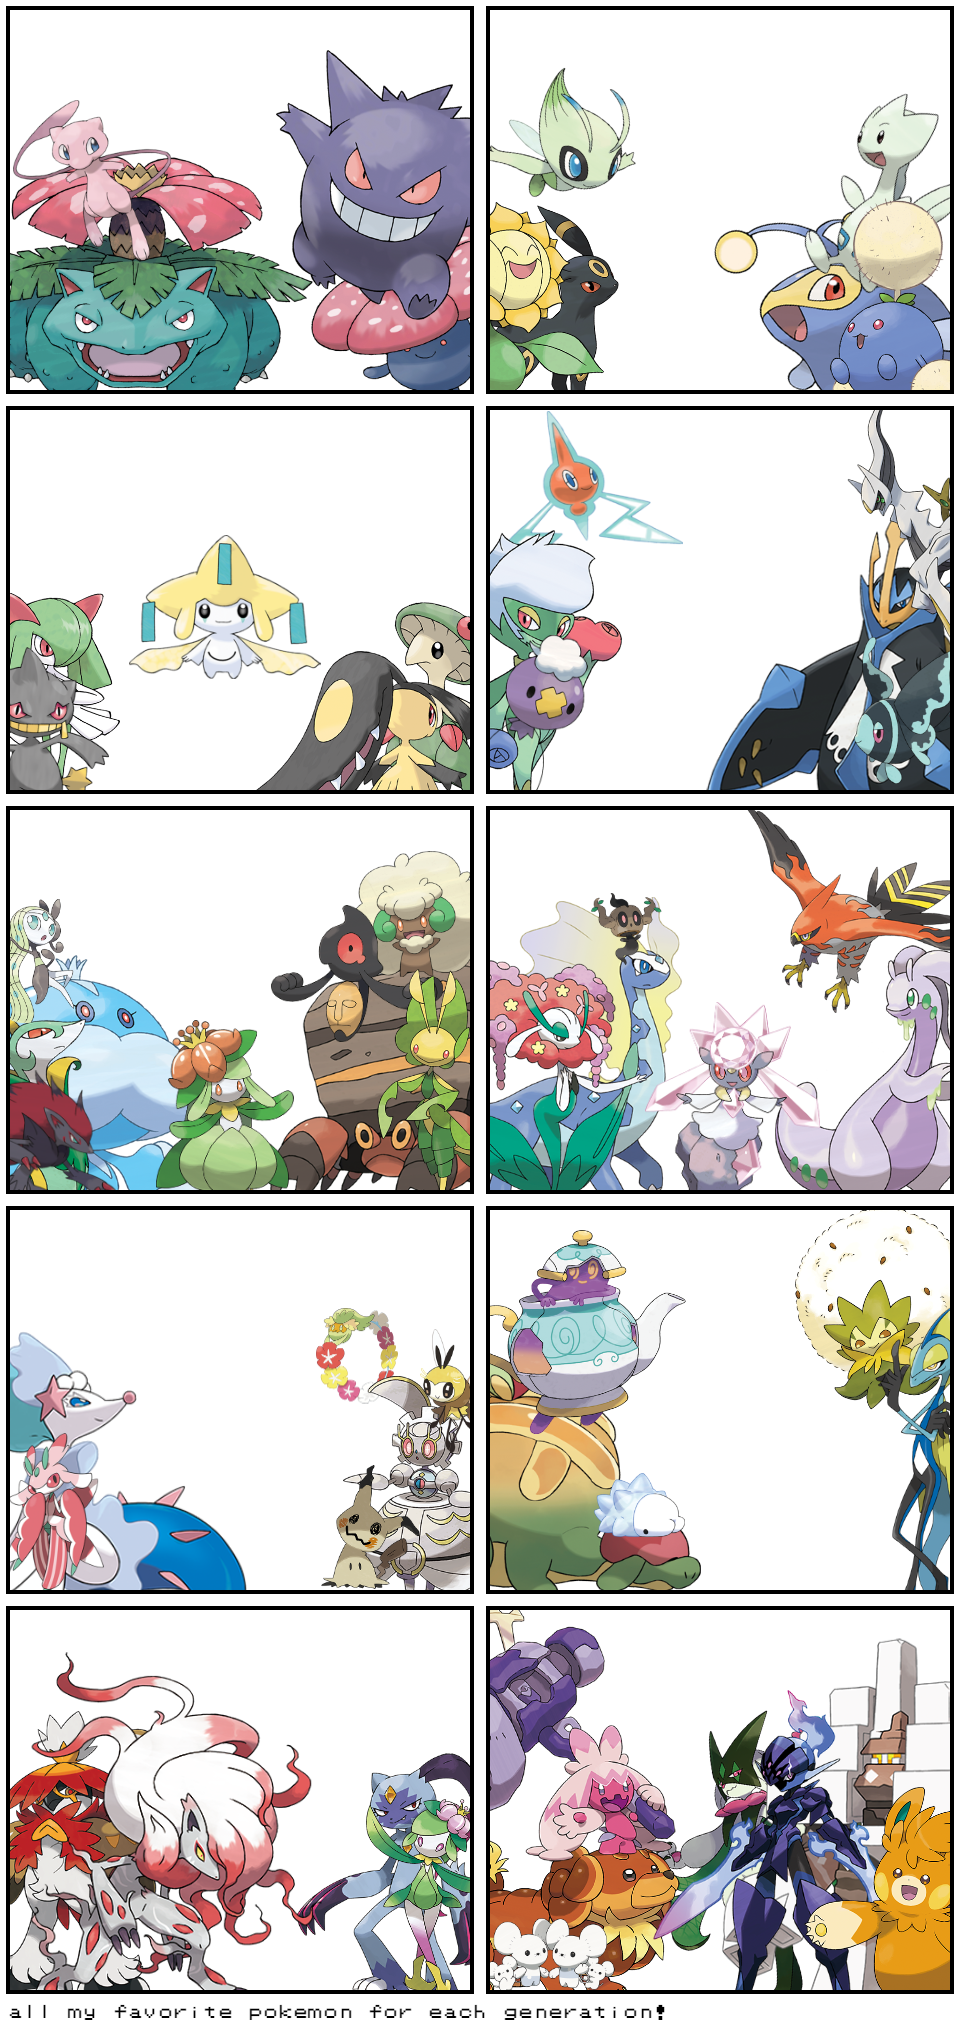 all my favorite pokemon for each generation!